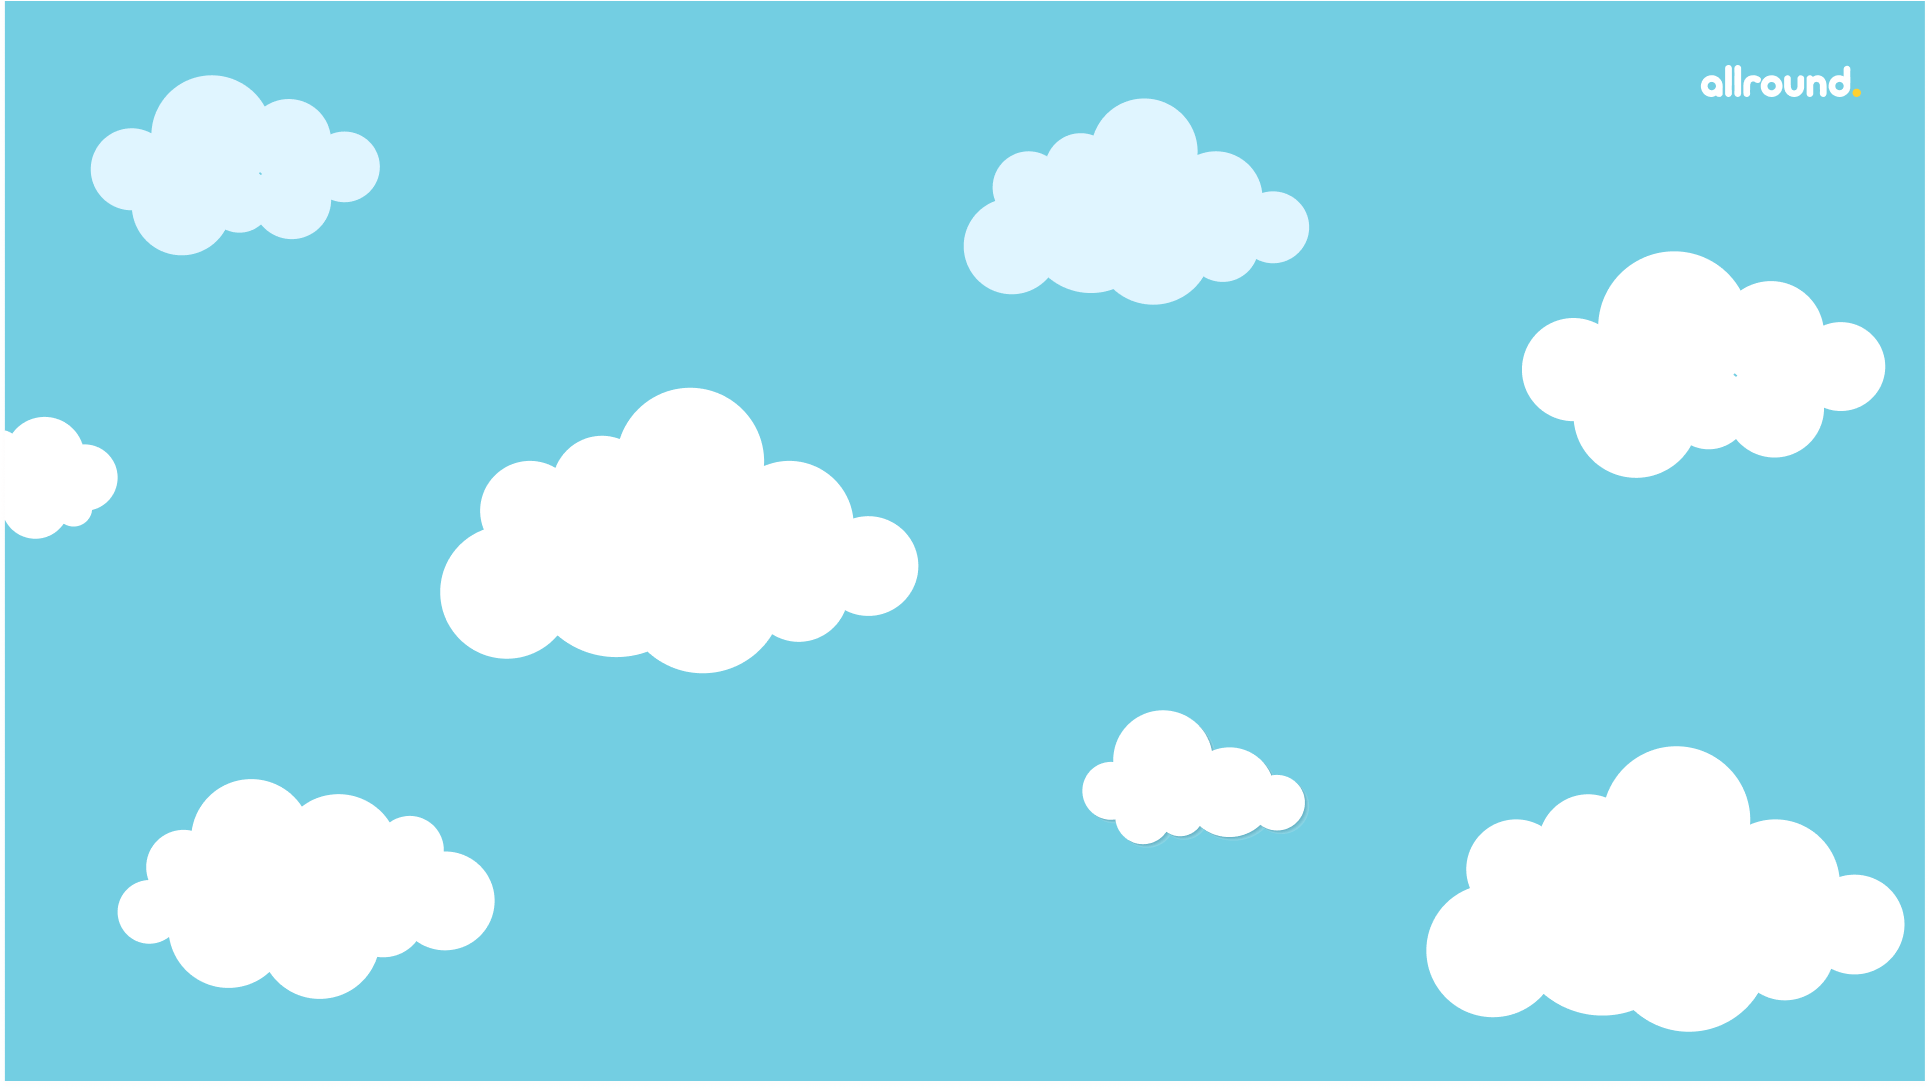 How to Draw Clouds? Step by Step Drawing Guide for Kids